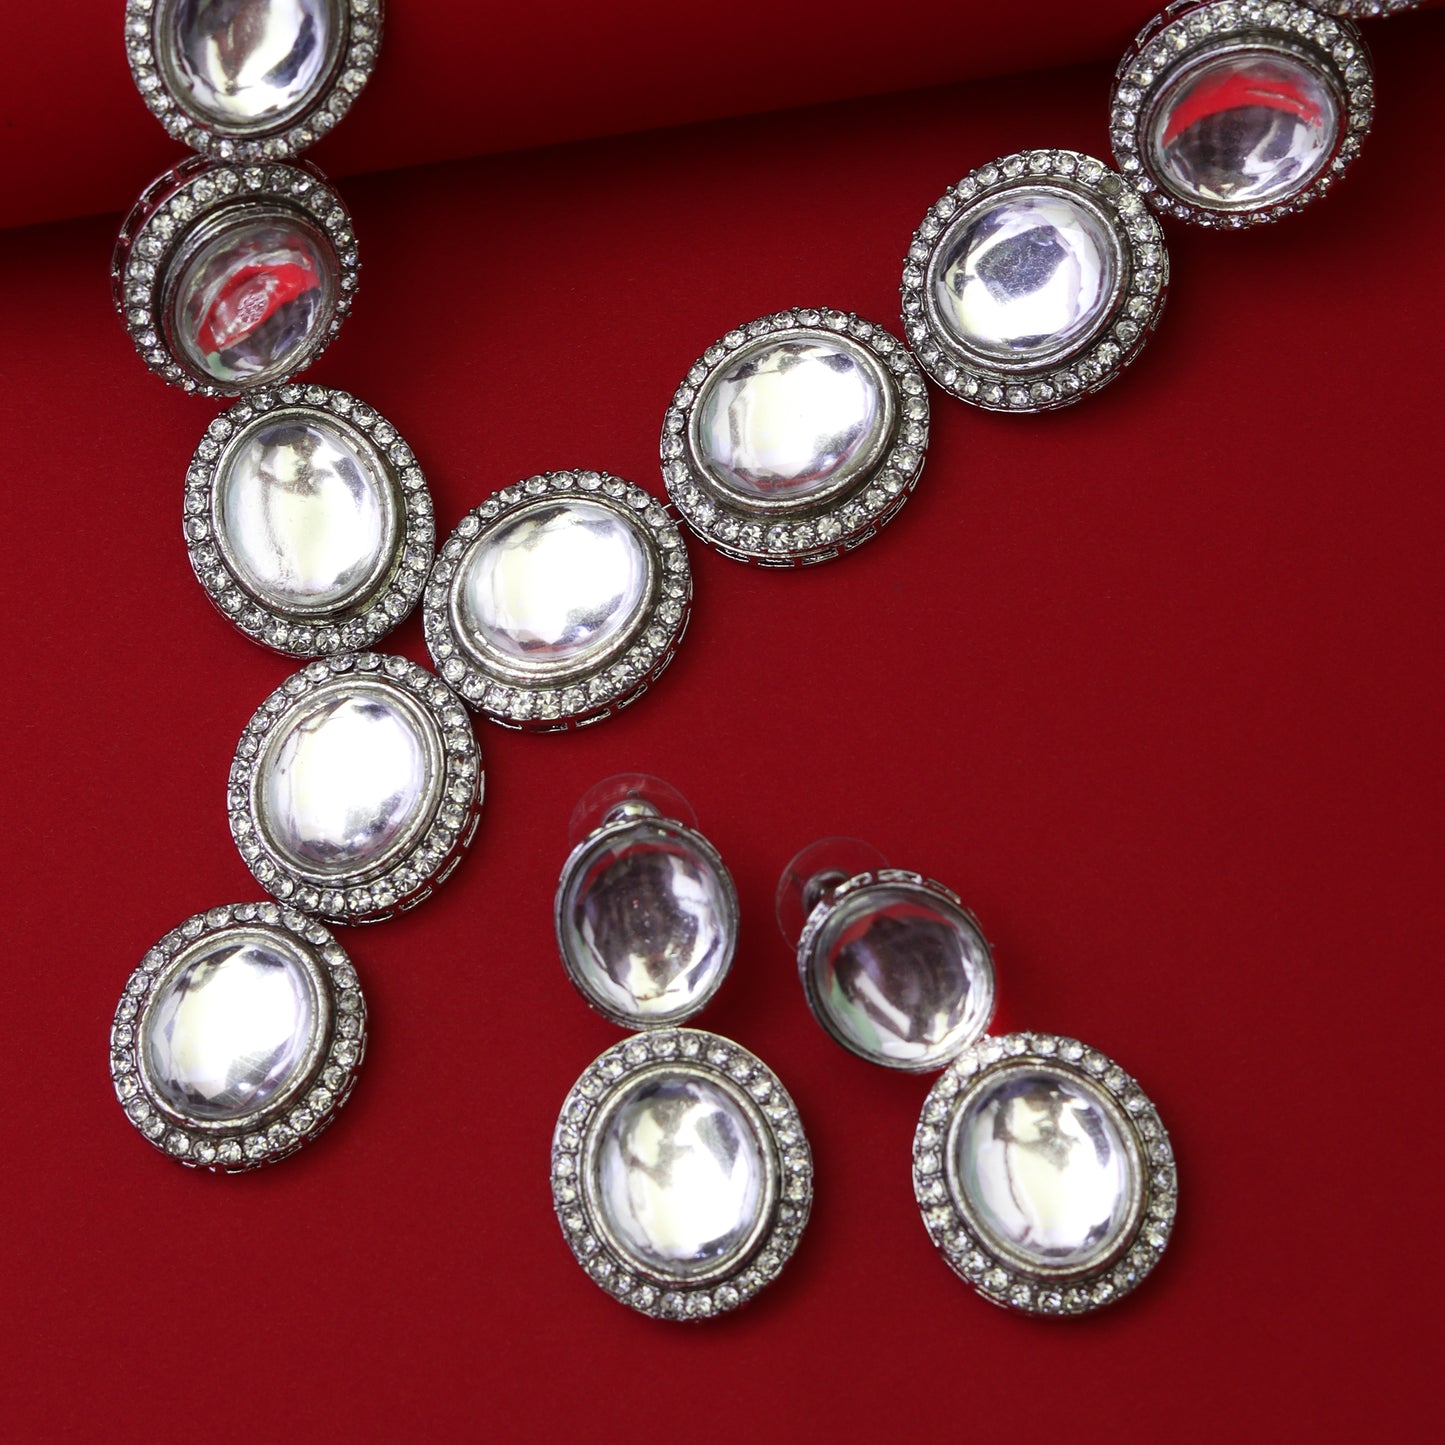 Sitara Necklace set with Earrings in silver